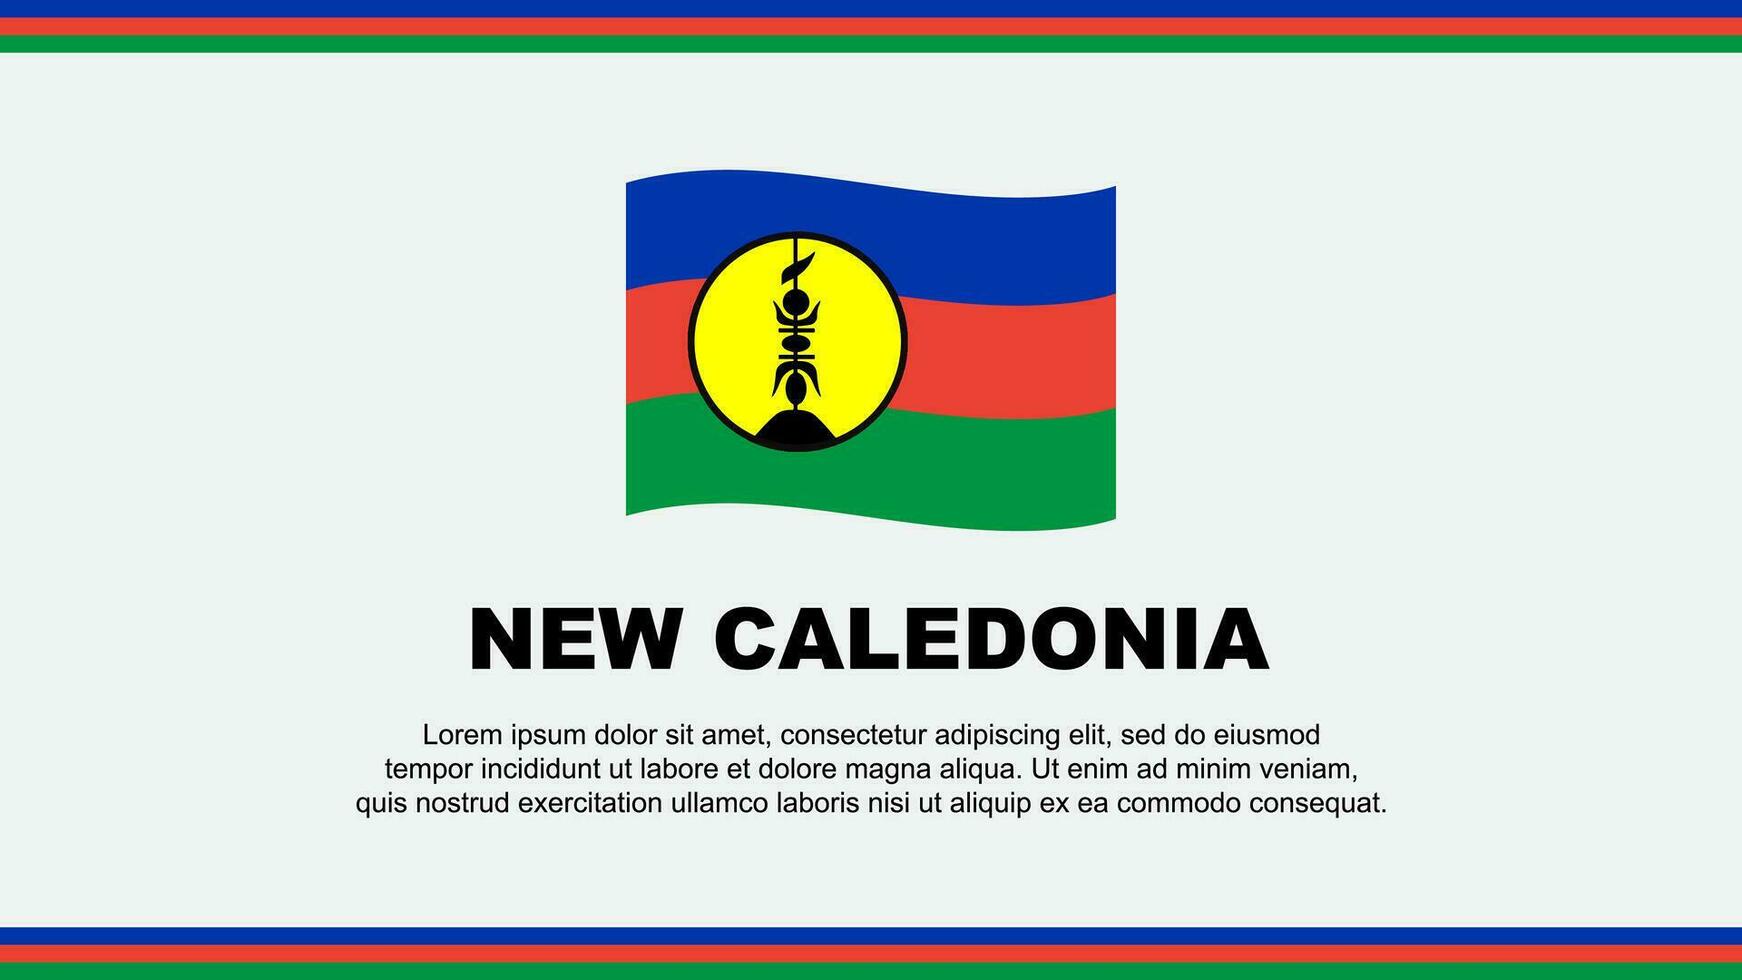 New Caledonia Flag Abstract Background Design Template. New Caledonia Independence Day Banner Social Media Vector Illustration. Design